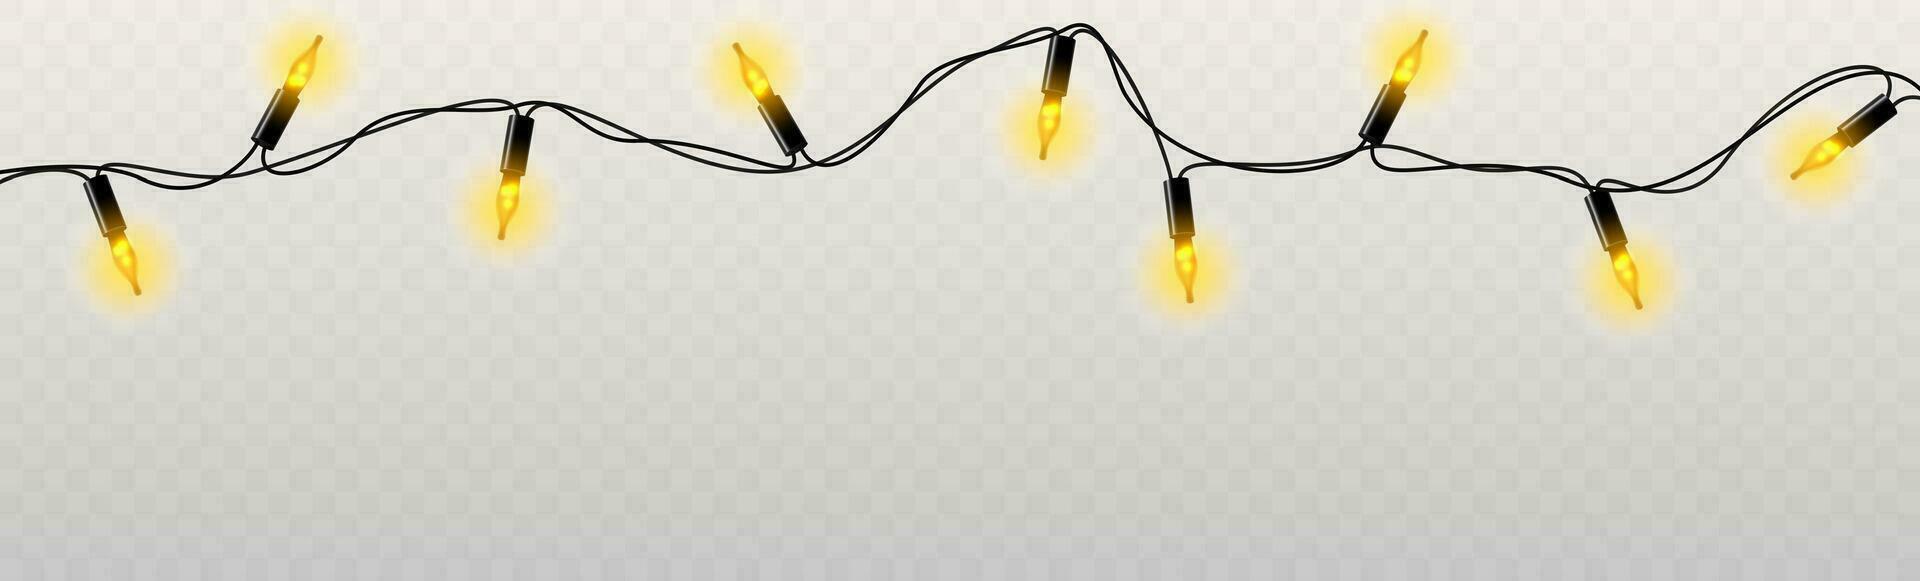 Golden Christmas tree garland lights isolated on a light background. Vector illustration.